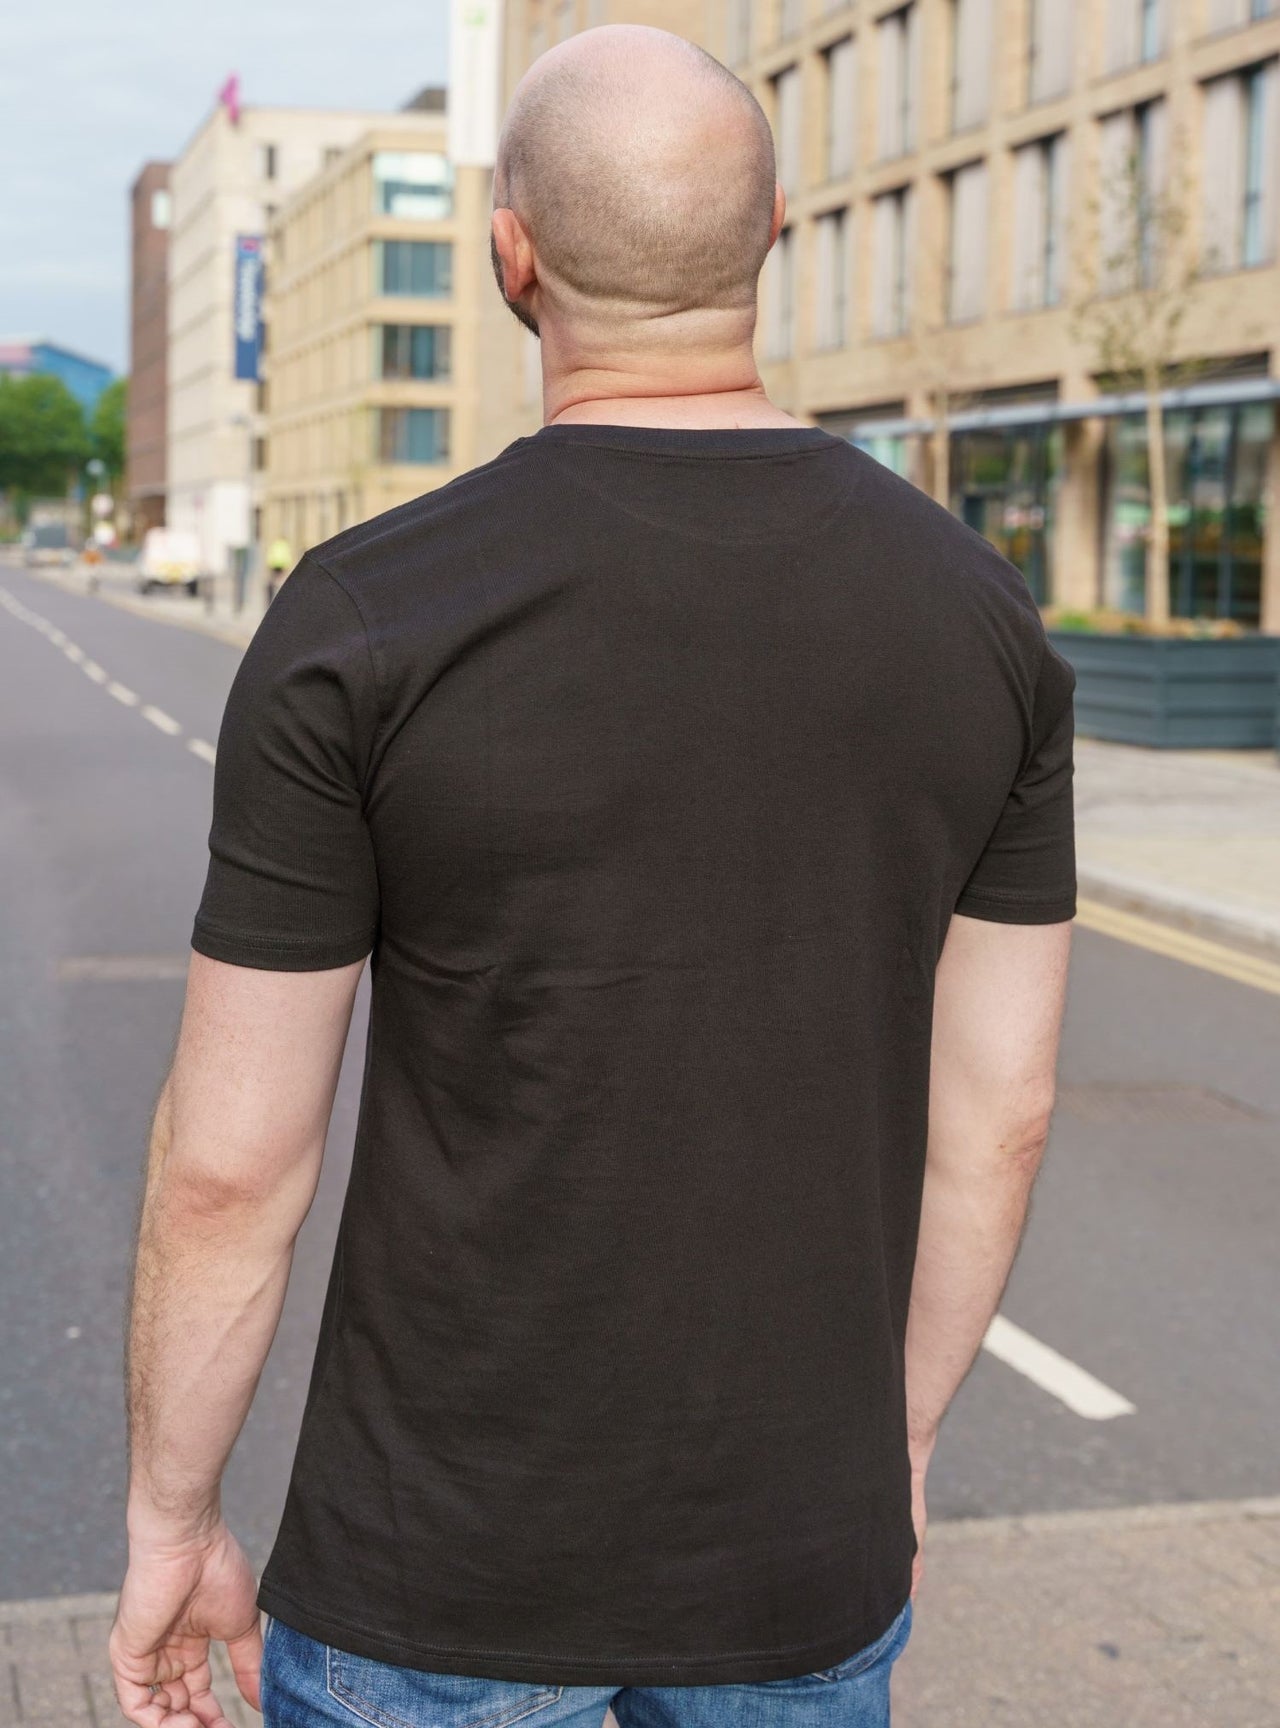 A shot from behind of a tall skinny guy wearing a tall slim graphic t-shirt.